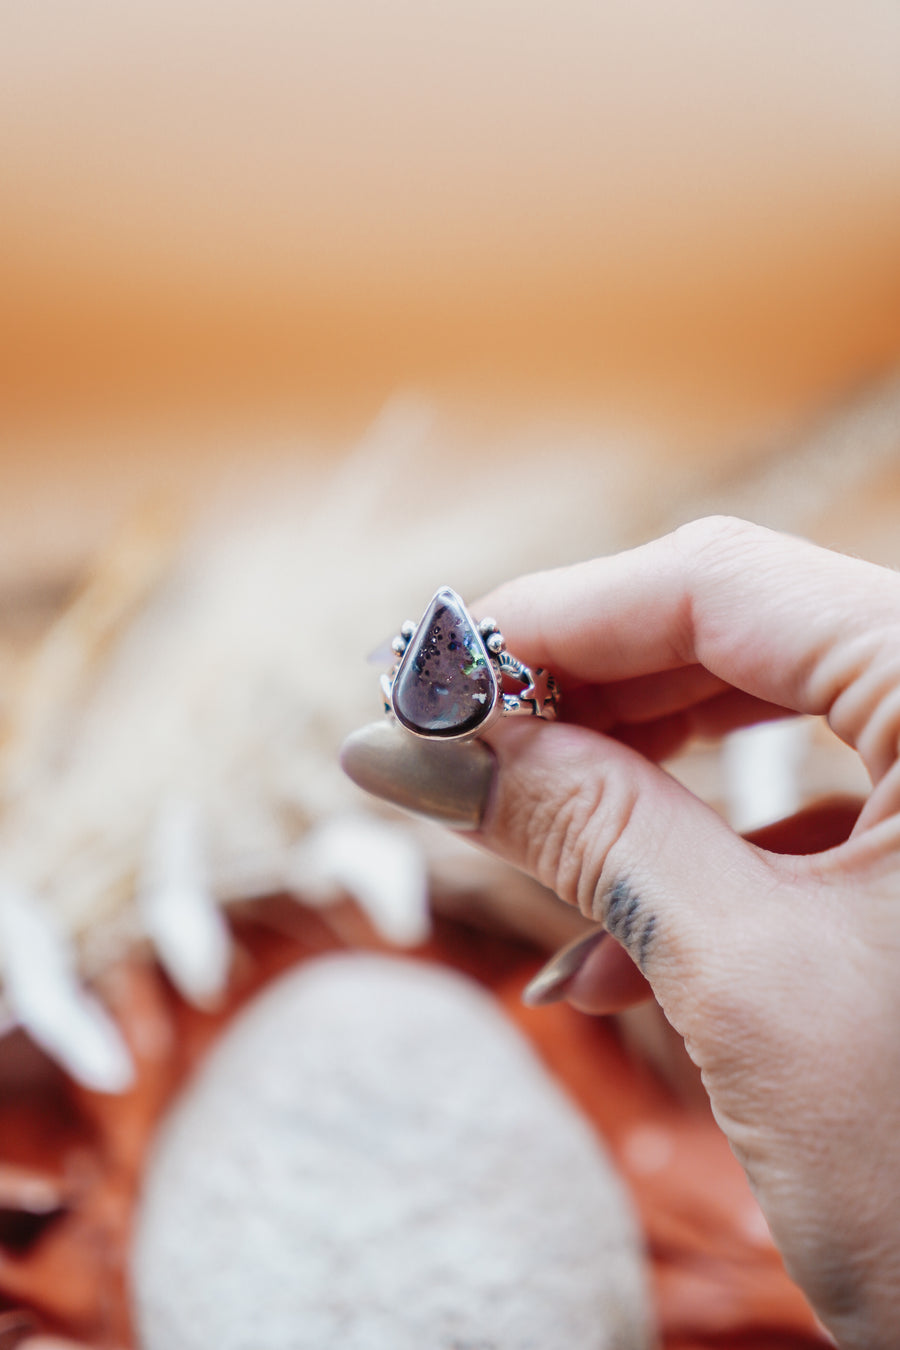 The Boulder Opal Ring (Size 9.5)